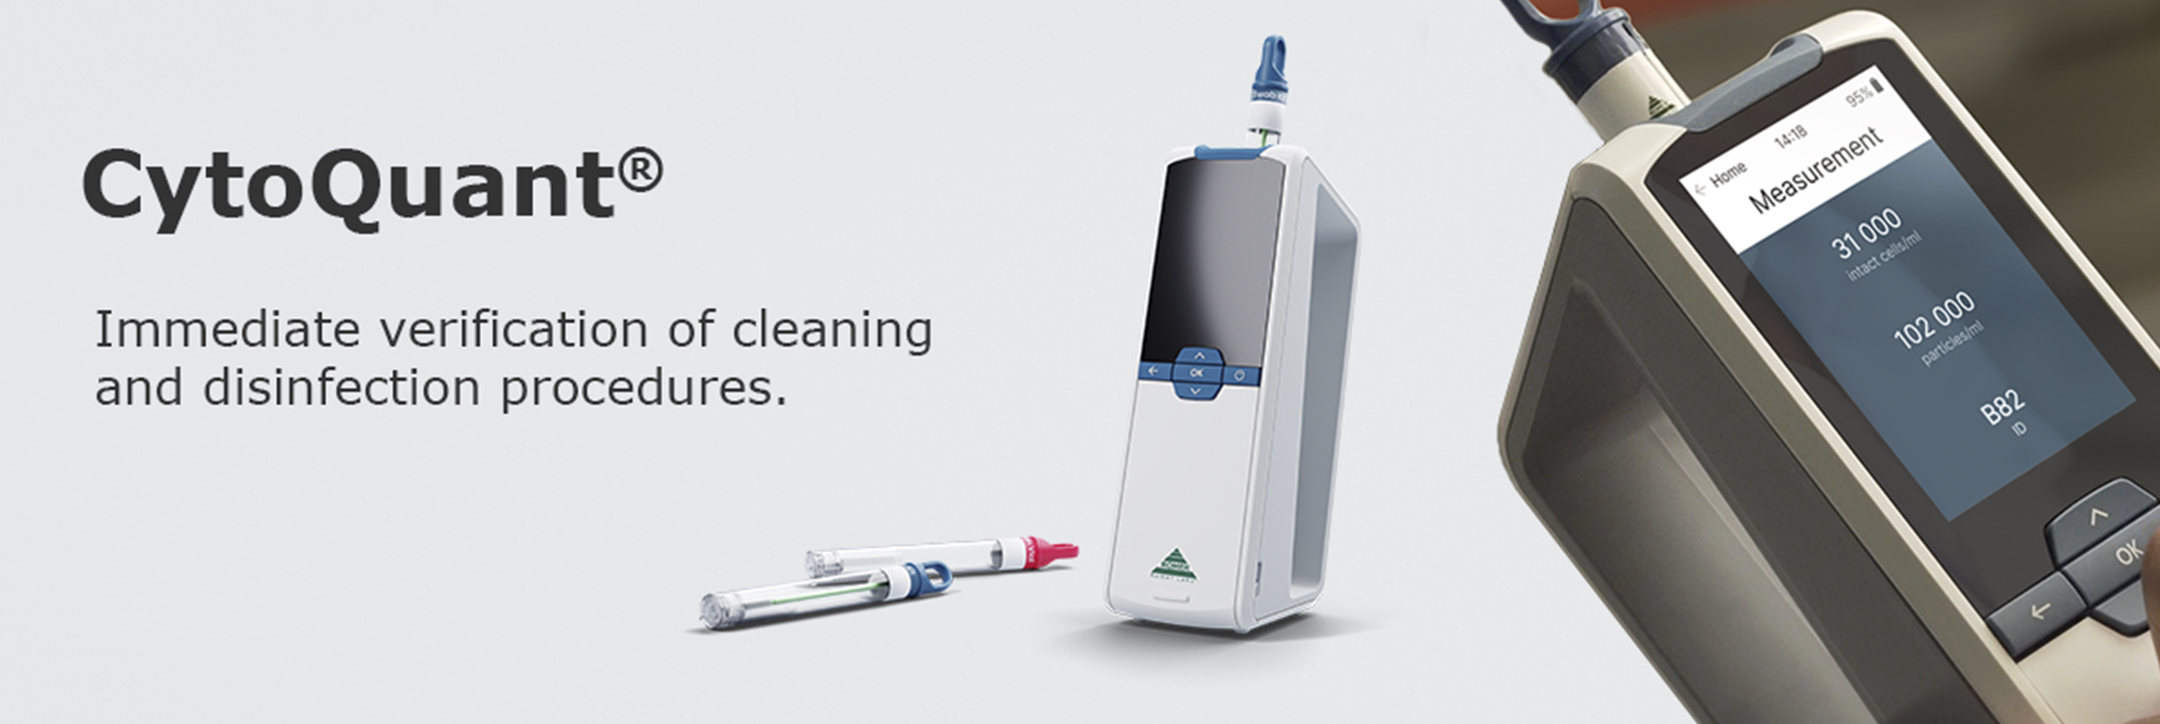 Romer Labs® Introduces CytoQuant®, the Mobile Flow Cytometer Designed for the Immediate Verification of Cleaning and Disinfection Procedures.